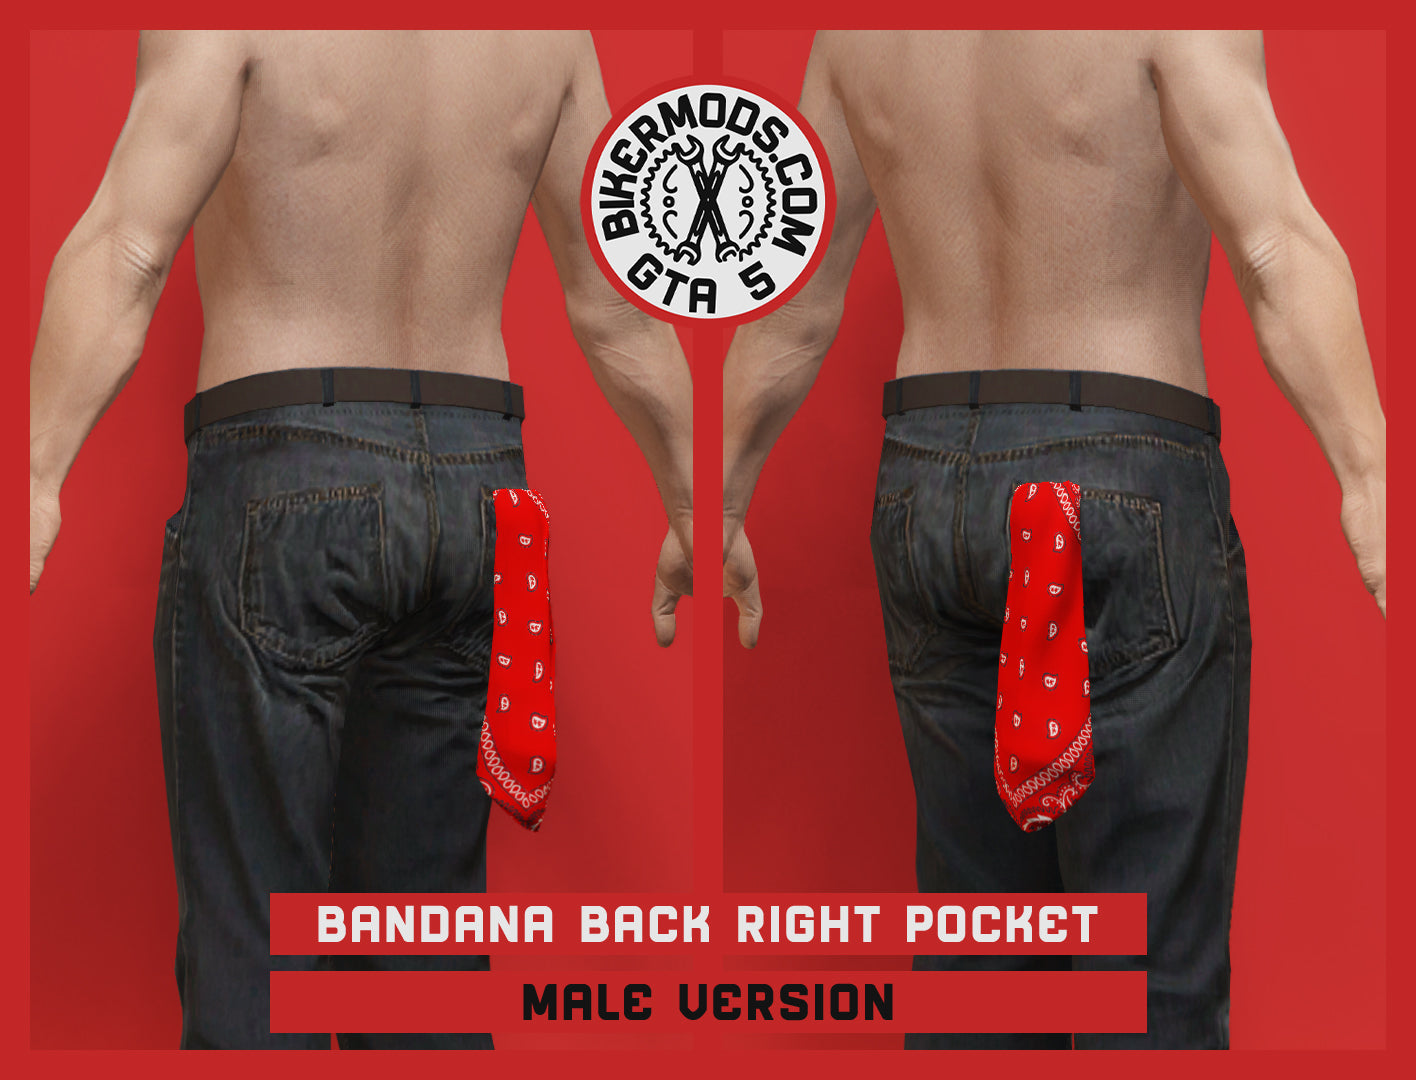 Bandana Back Right Pocket (Male) 15 Colors Included